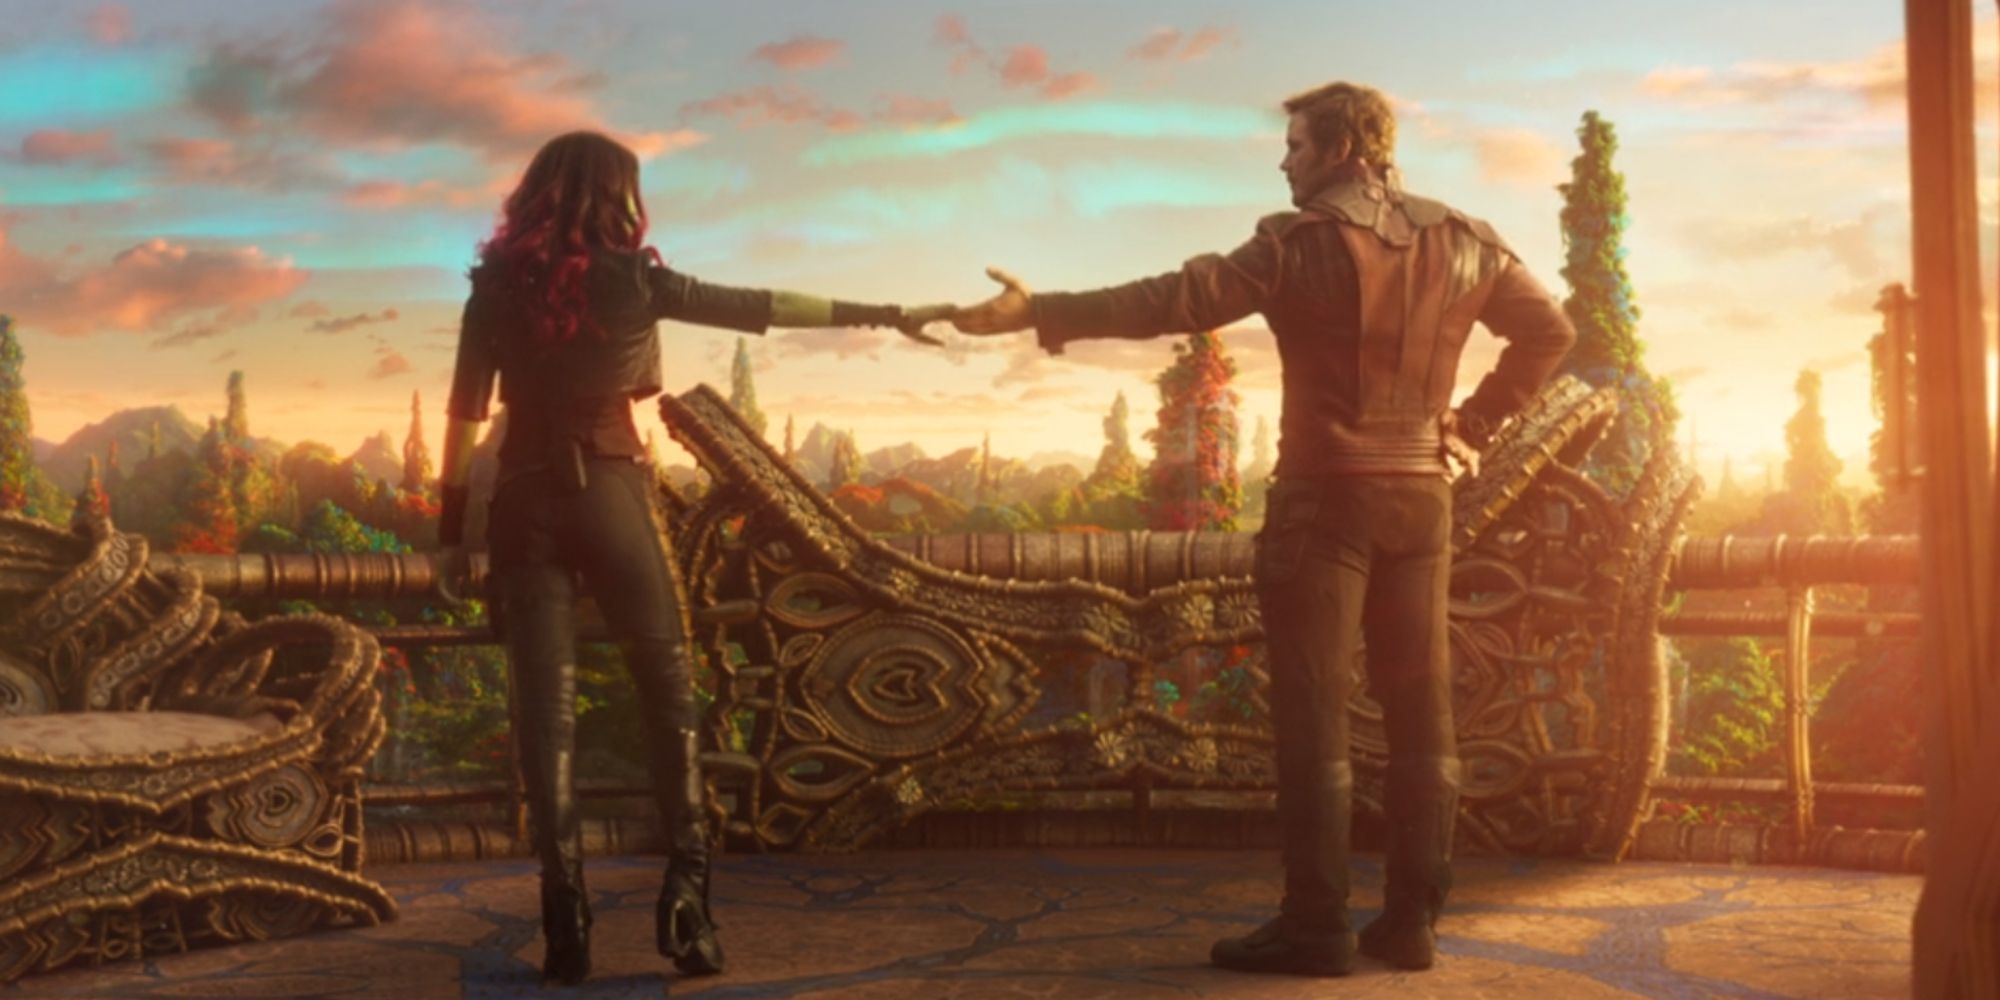 Peter Quill dancing with Gamora on Ego's planet in Guardians Of The Galaxy Vol. 2